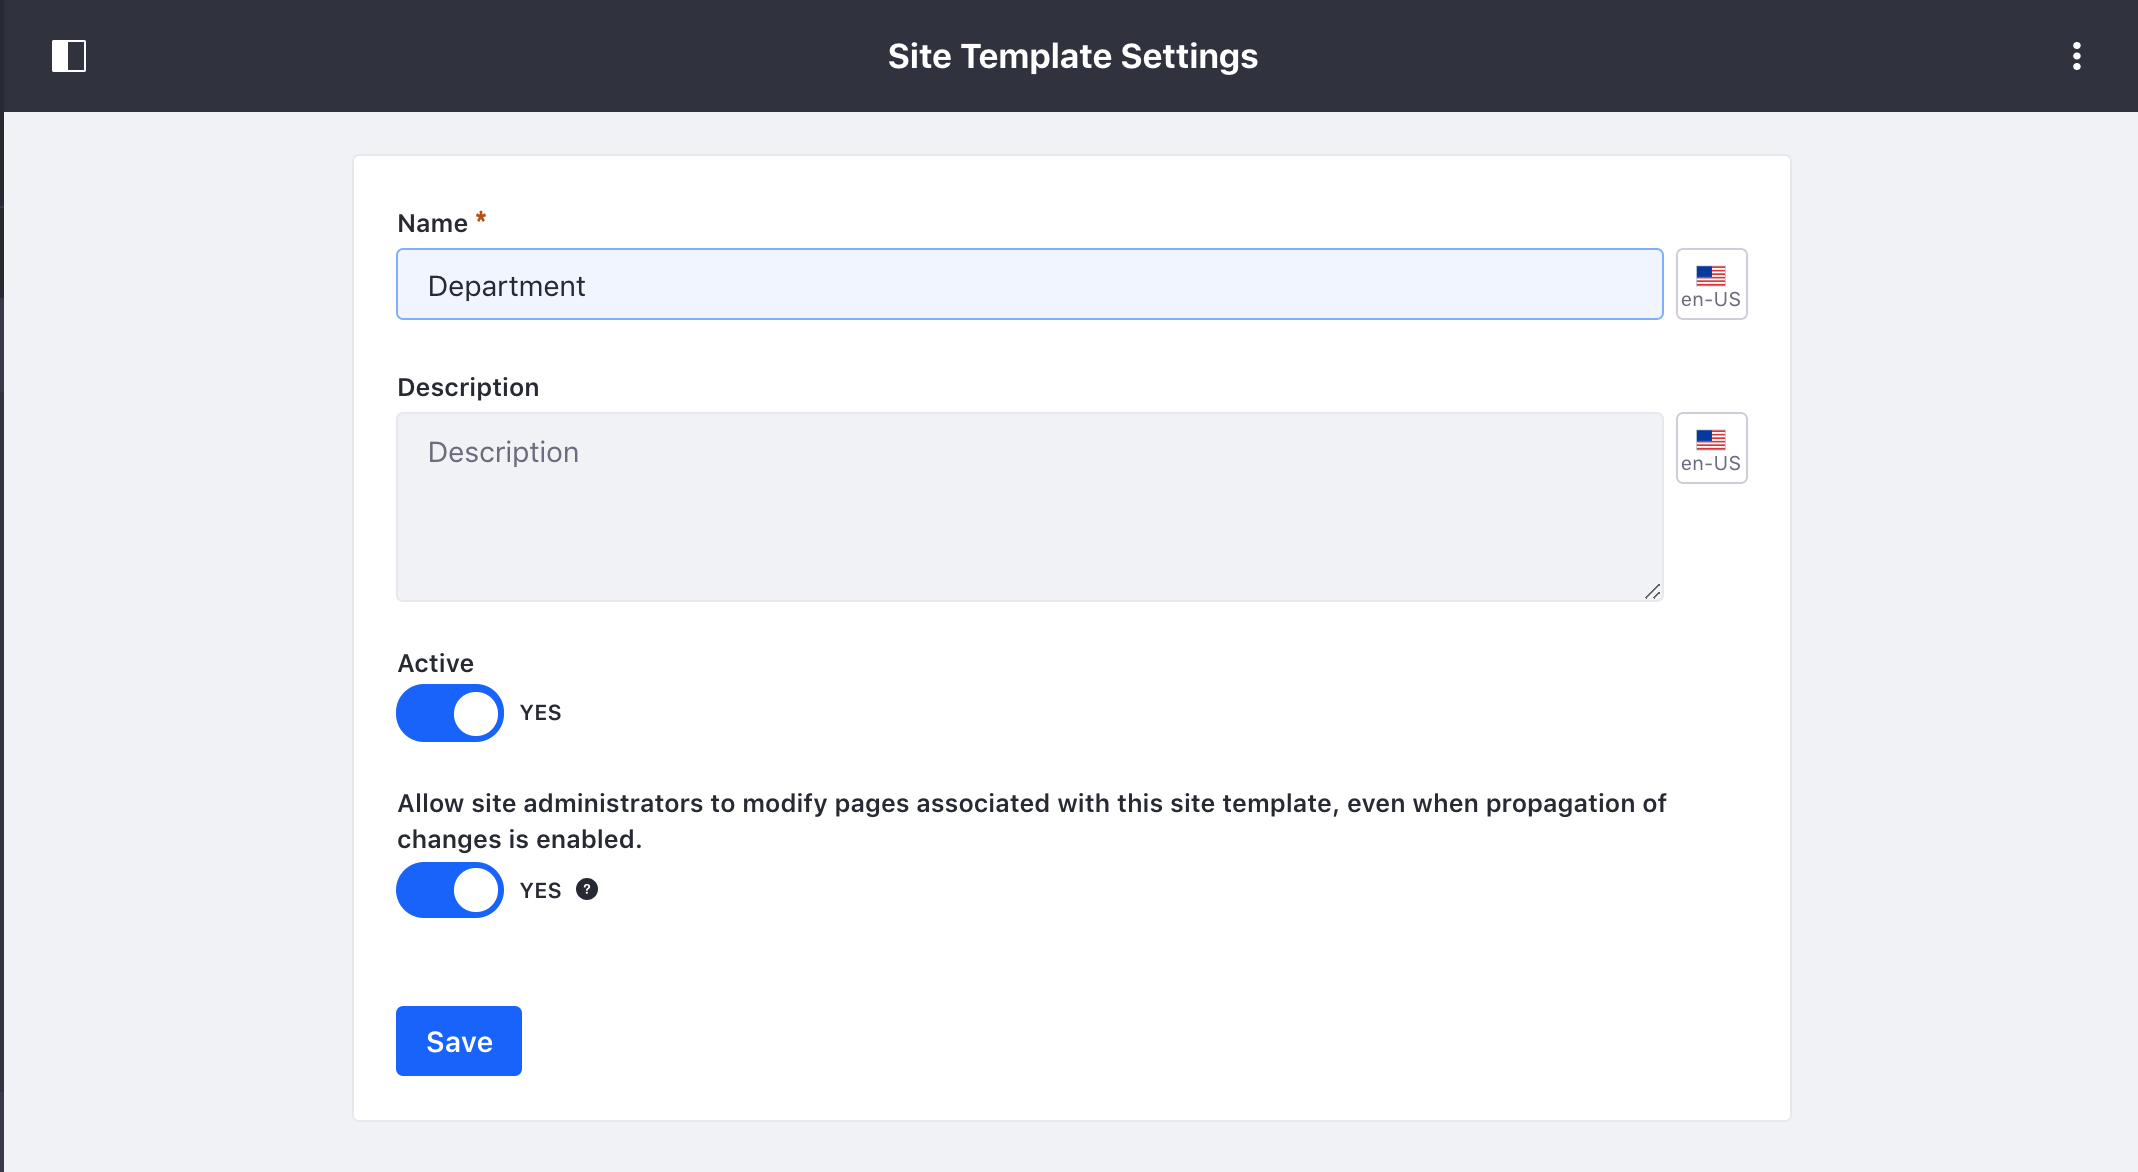 Figure 1: Site templates have several configurable options including the option to allow Site administrators to modify pages associated with the Site template.